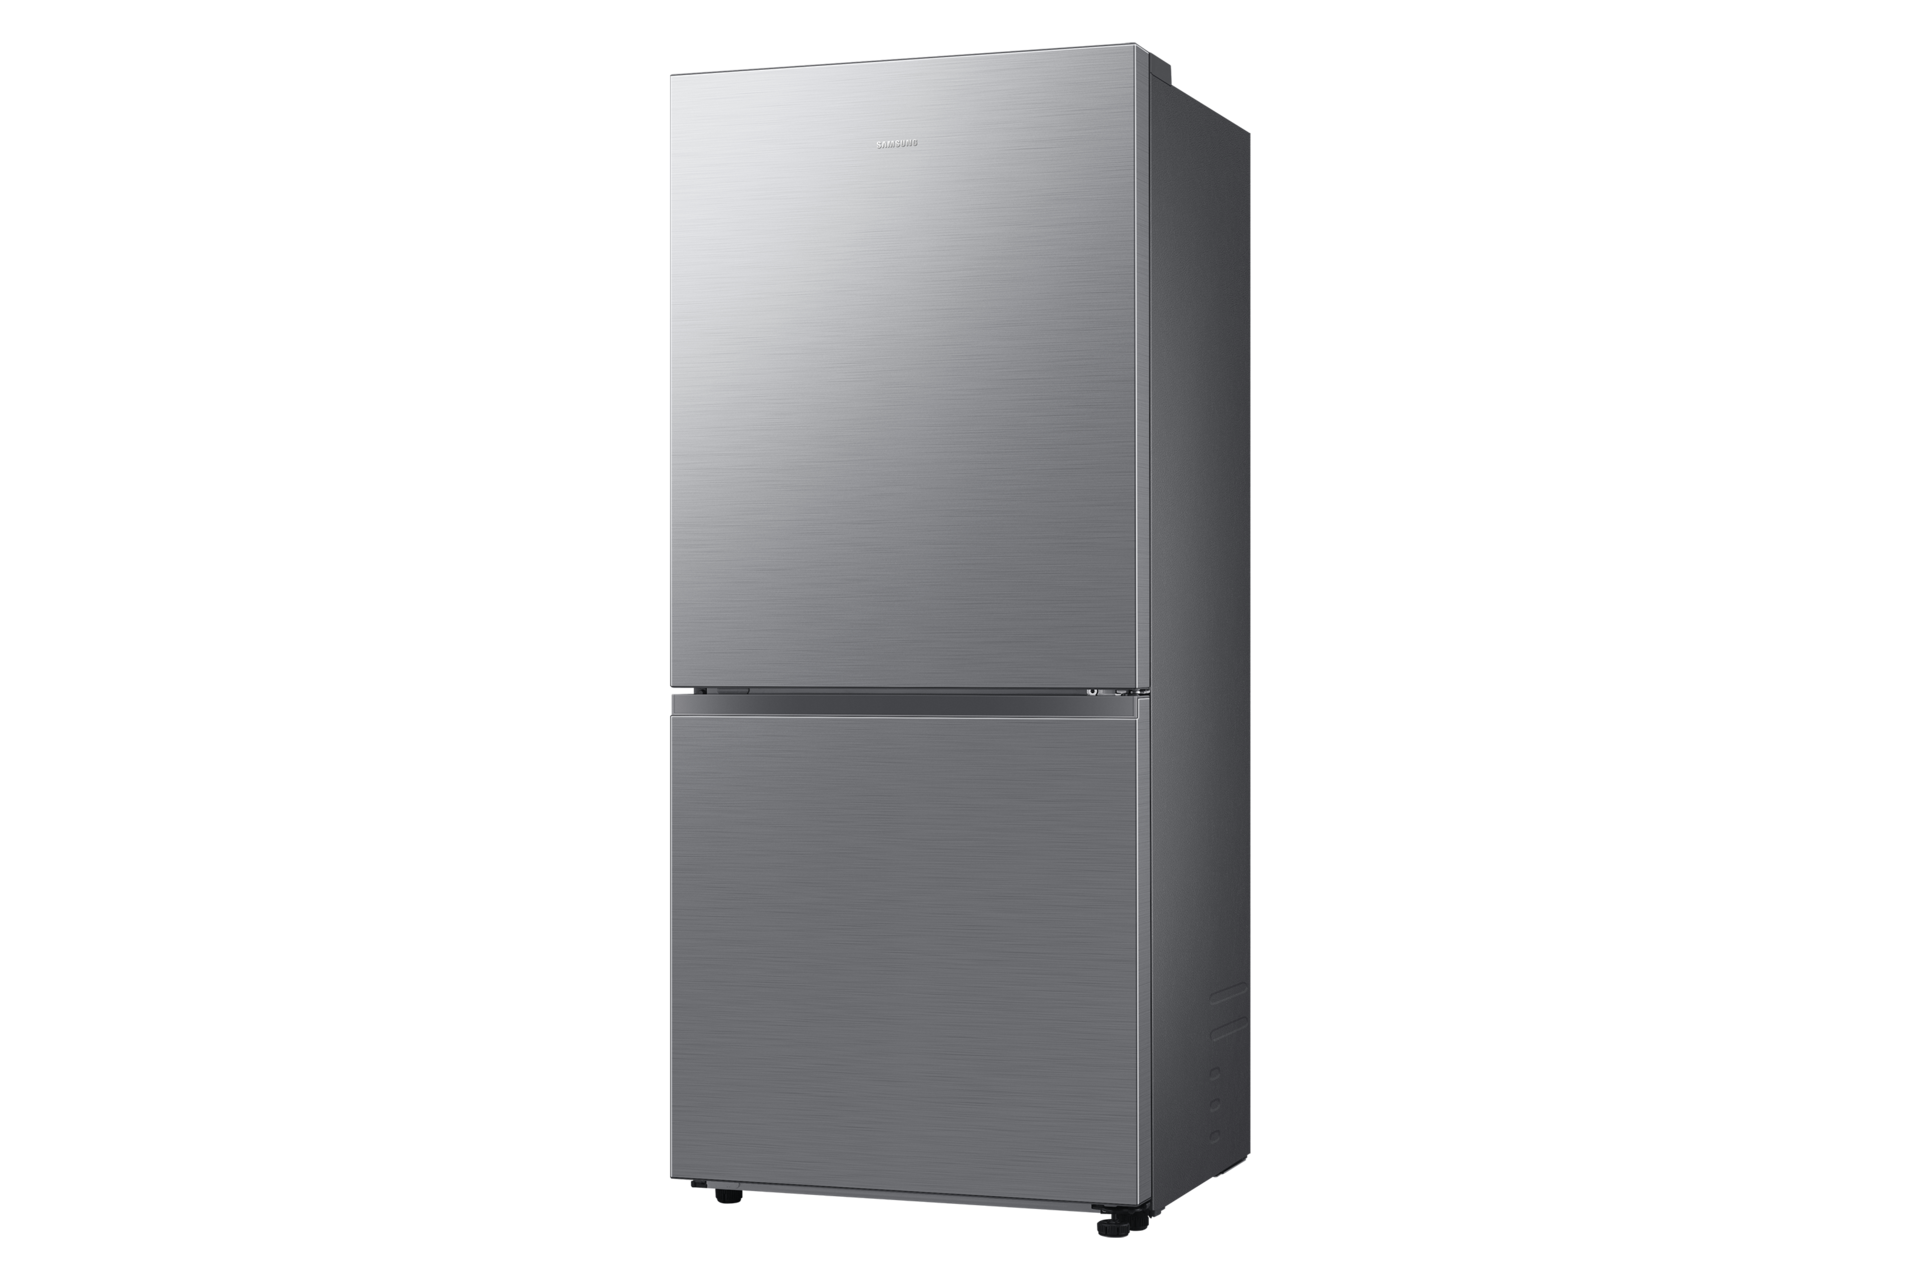 Refrigerator BMF RB45DG600ES9 SpaceMax™ Technology 16.2 cu.ft. Refined Inox